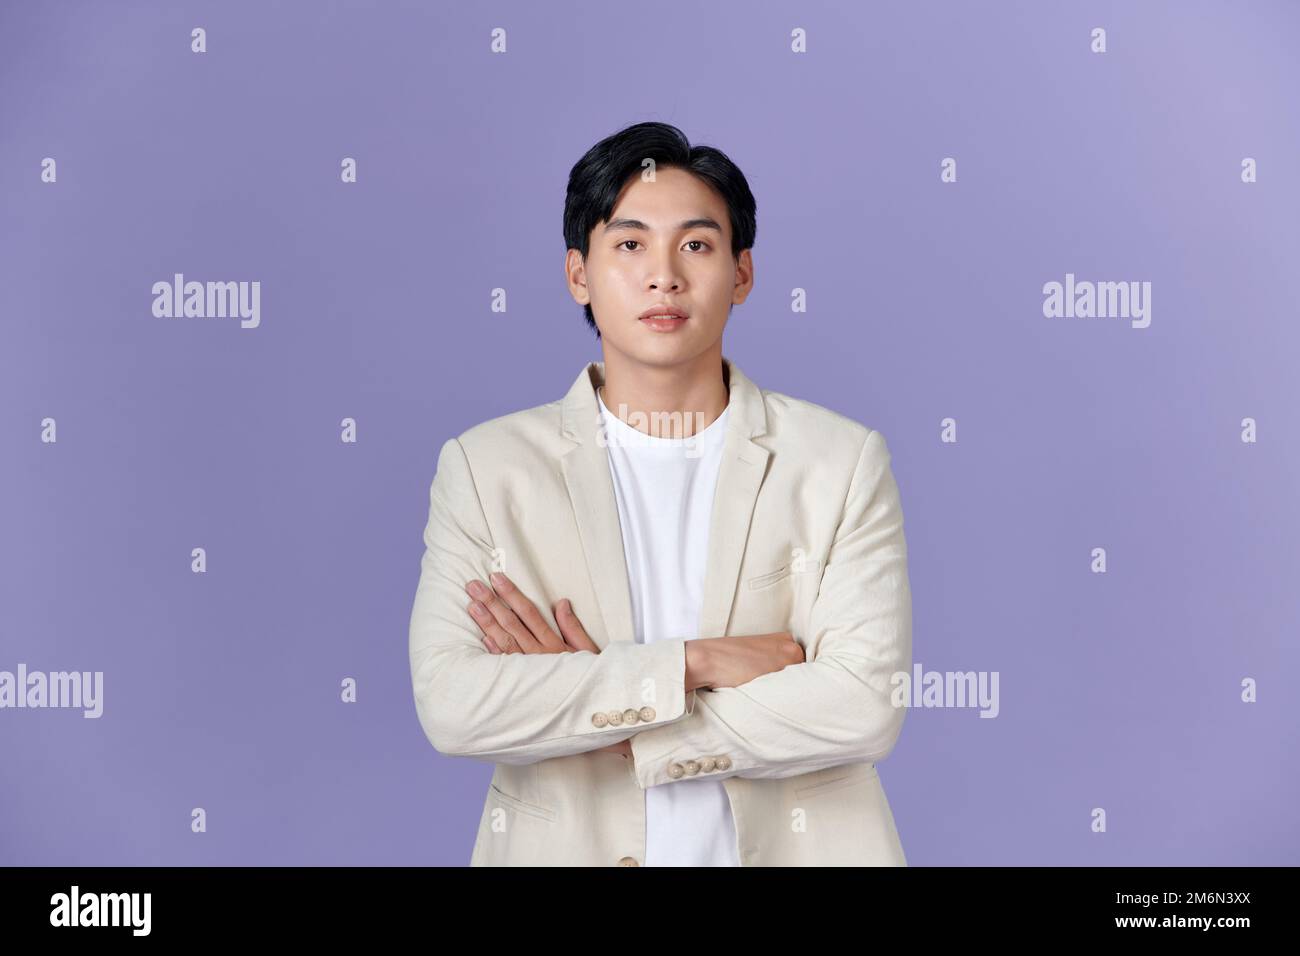 Smiling young Asian businessman in beige suit isolated on purple background Stock Photo